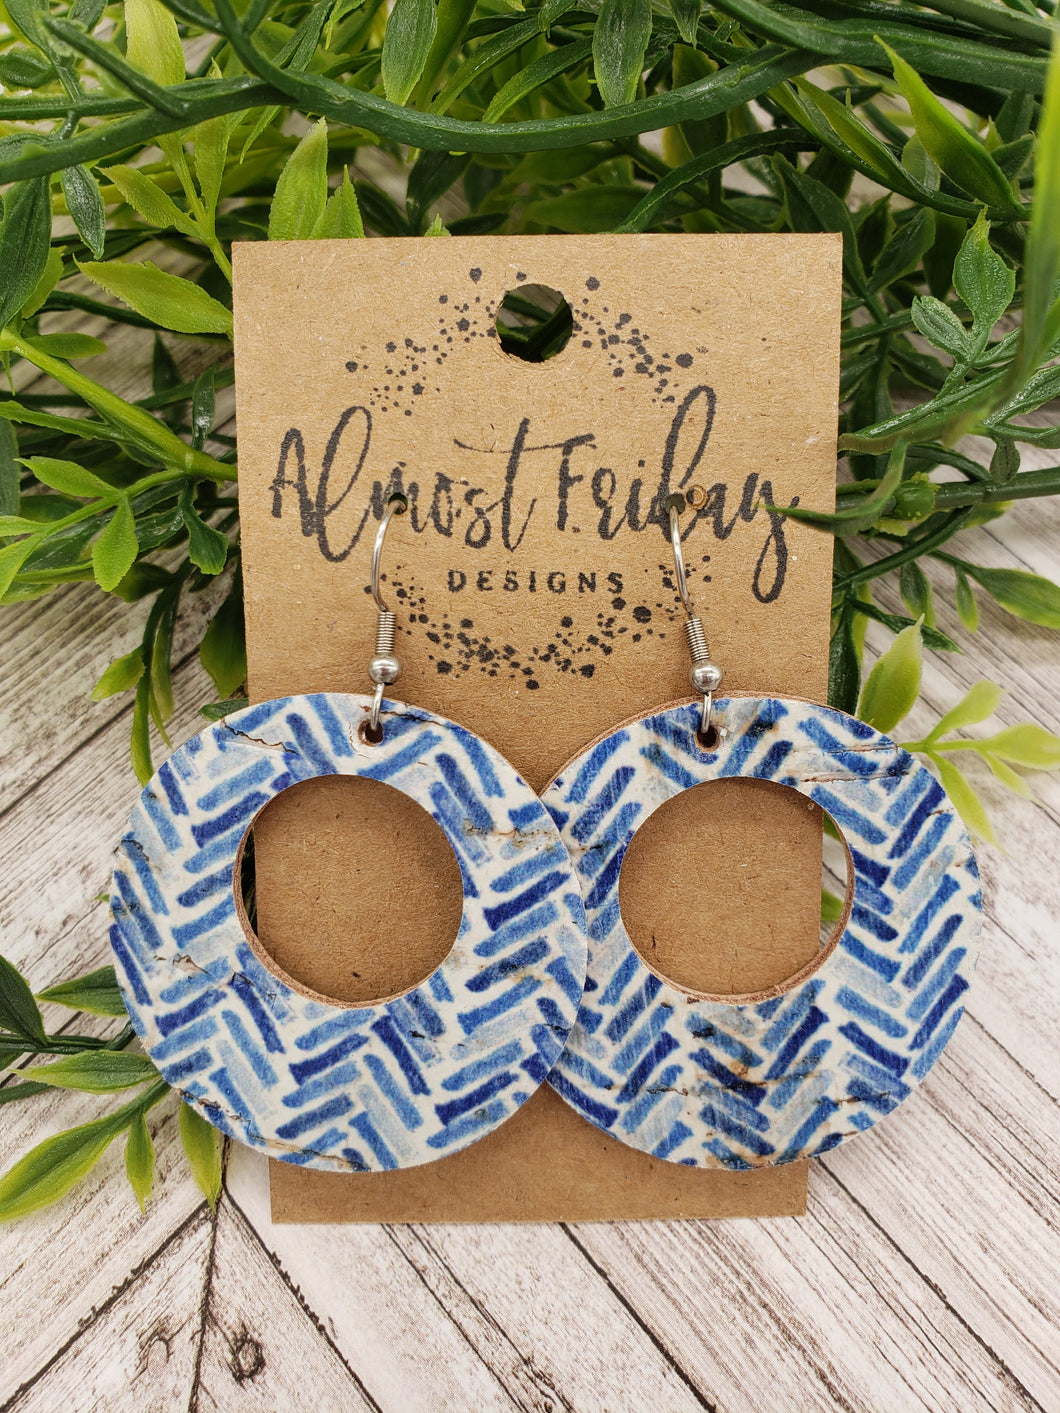 Genuine Leather Earrings - Circle Cut Out Earrings - Blue and White - Chevron Design Earrings